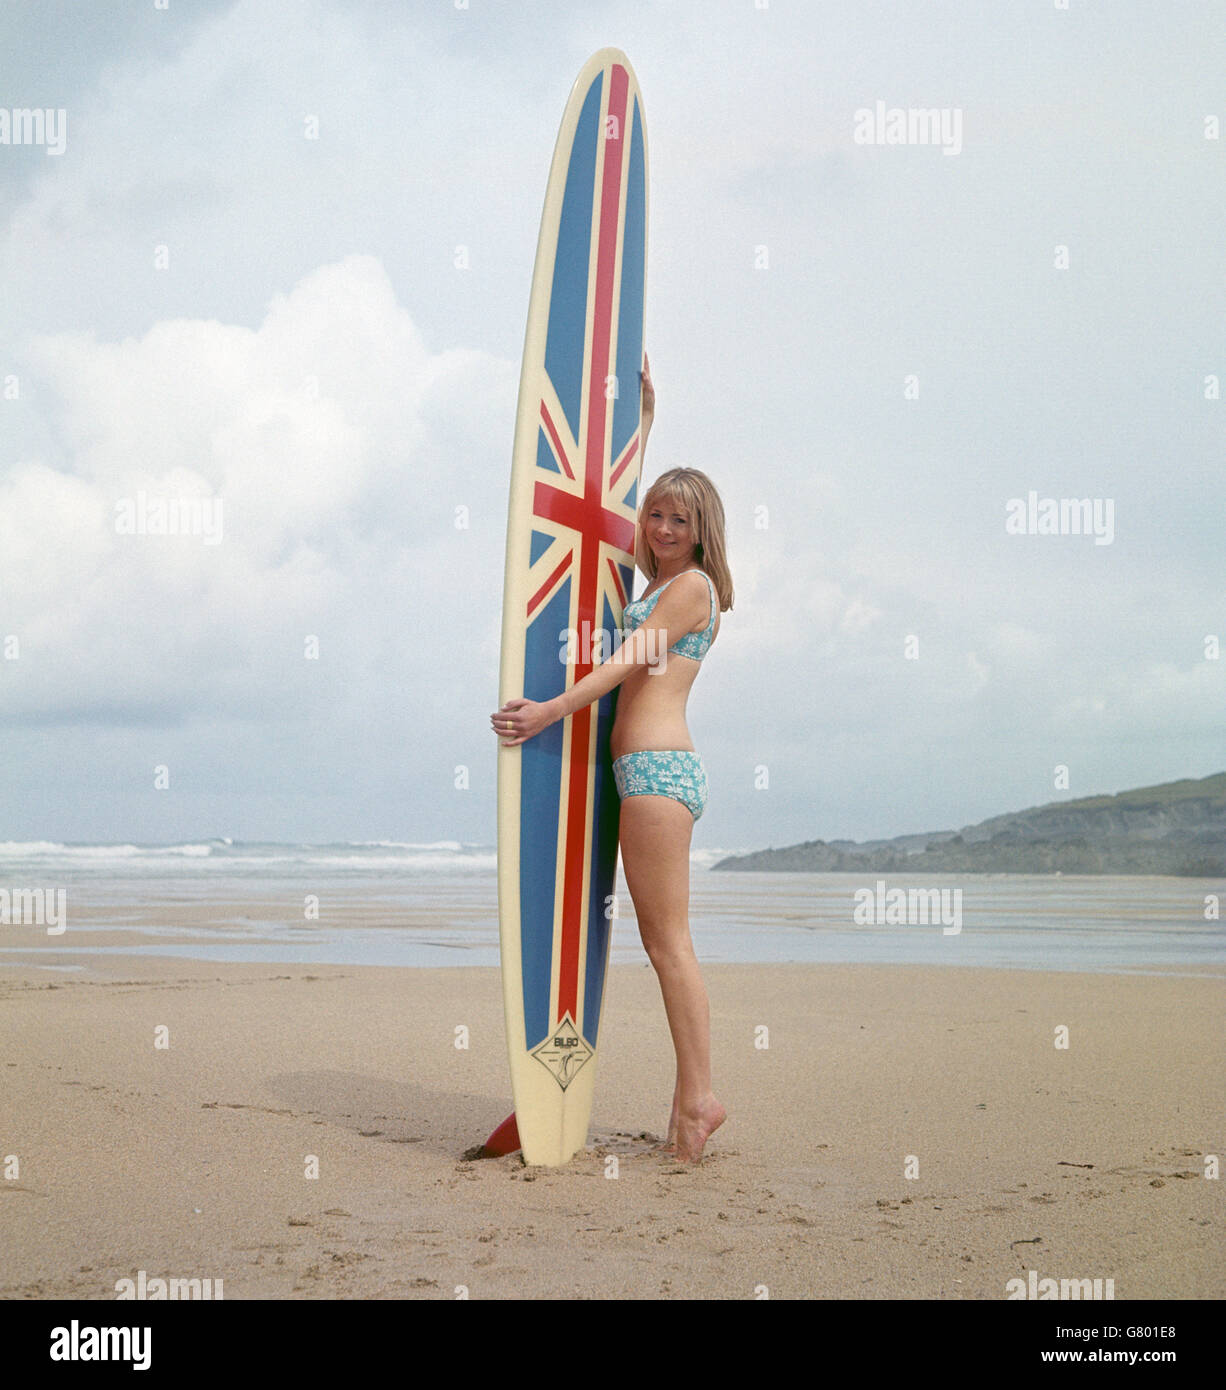 Surfing enthusiast Simone Renvoize, 22, of Newquay, at Fistral Beach in Cornwall. Stock Photo